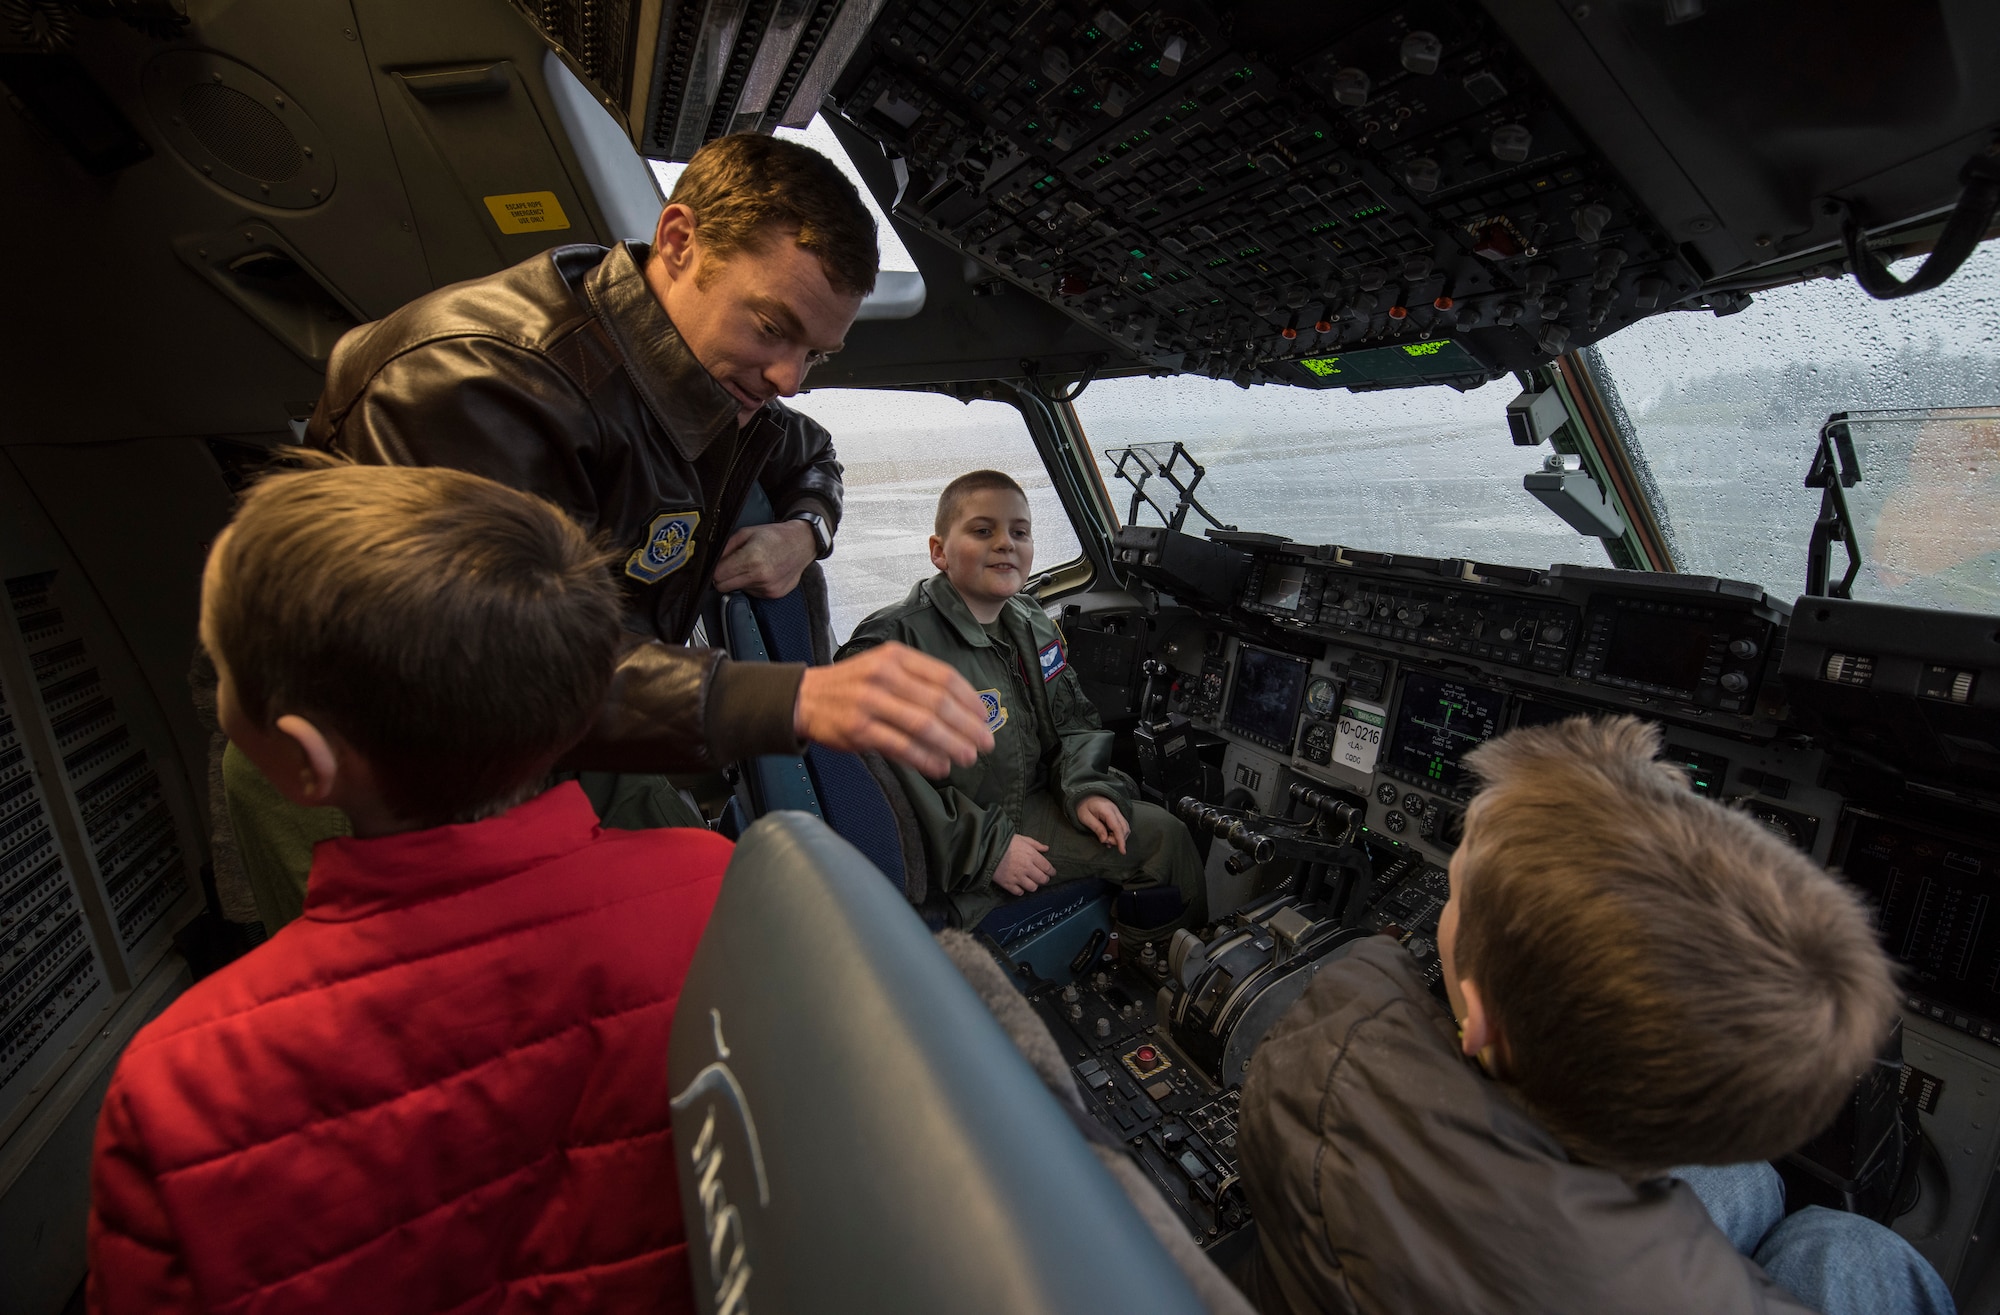 Capt. Hatton Updike, 4th Airlift Squadron pilot, tells McKay Neel (back right), McChord’s newest Pilot for a Day participant, and two friends about the features of a C-17 Globemaster III during a McChord Field tour at Joint Base Lewis-McChord, Wash., Feb. 20, 2018. McKay, along with his family and friends, spent the day learning about life at as an Airman and ended it with cake and ice cream at the 4th Airlift Squadron. (U.S. Air Force photo by Senior Airman Tryphena Mayhugh)